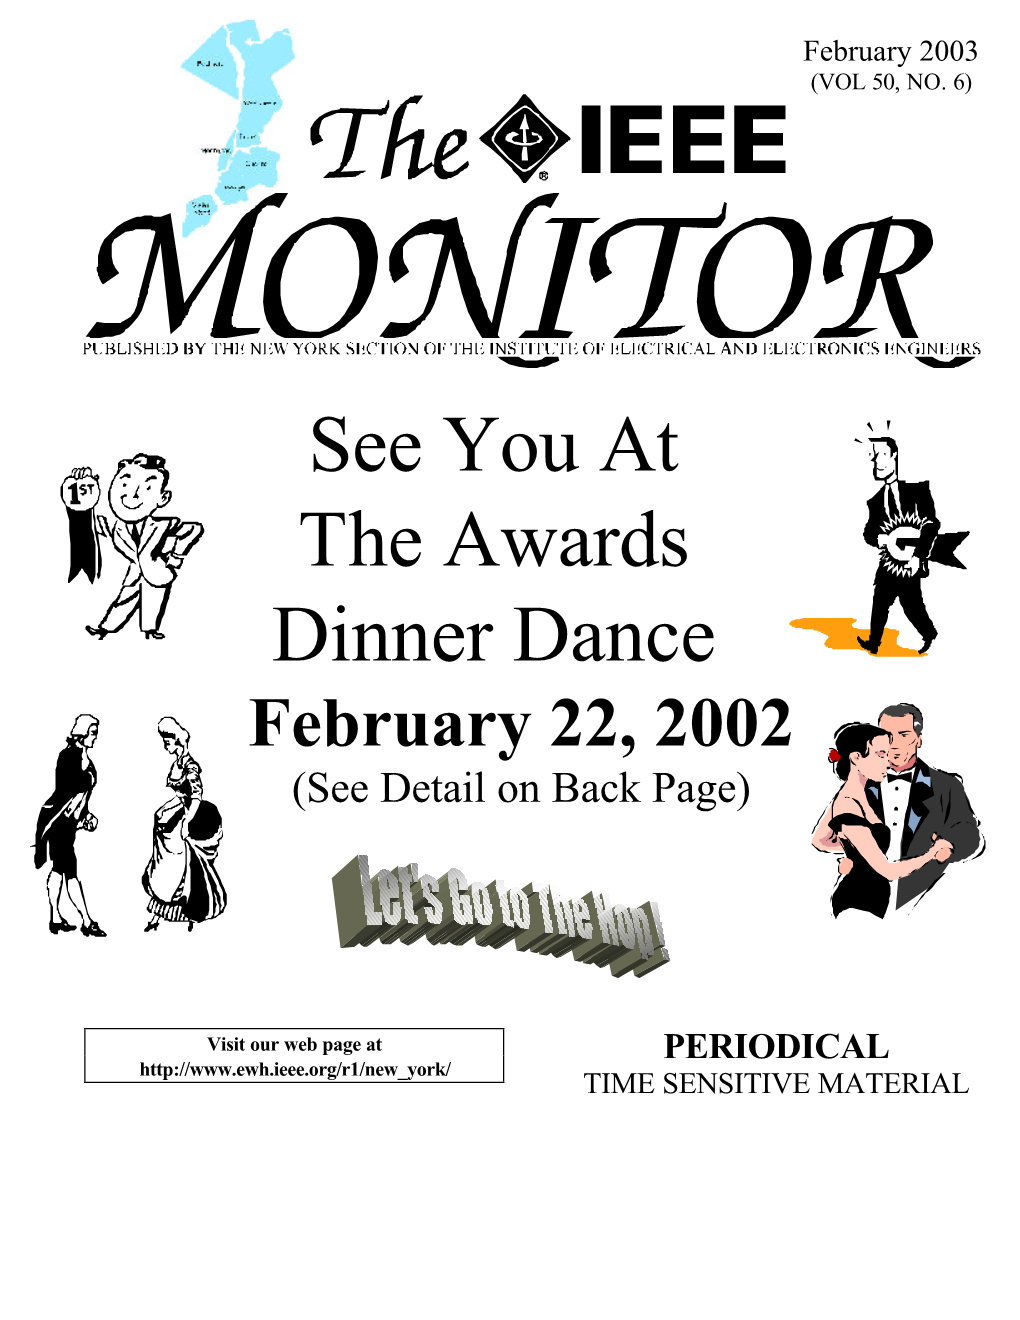 See You at the Awards Dinner Dance February 22, 2002 (See Detail on Back Page)